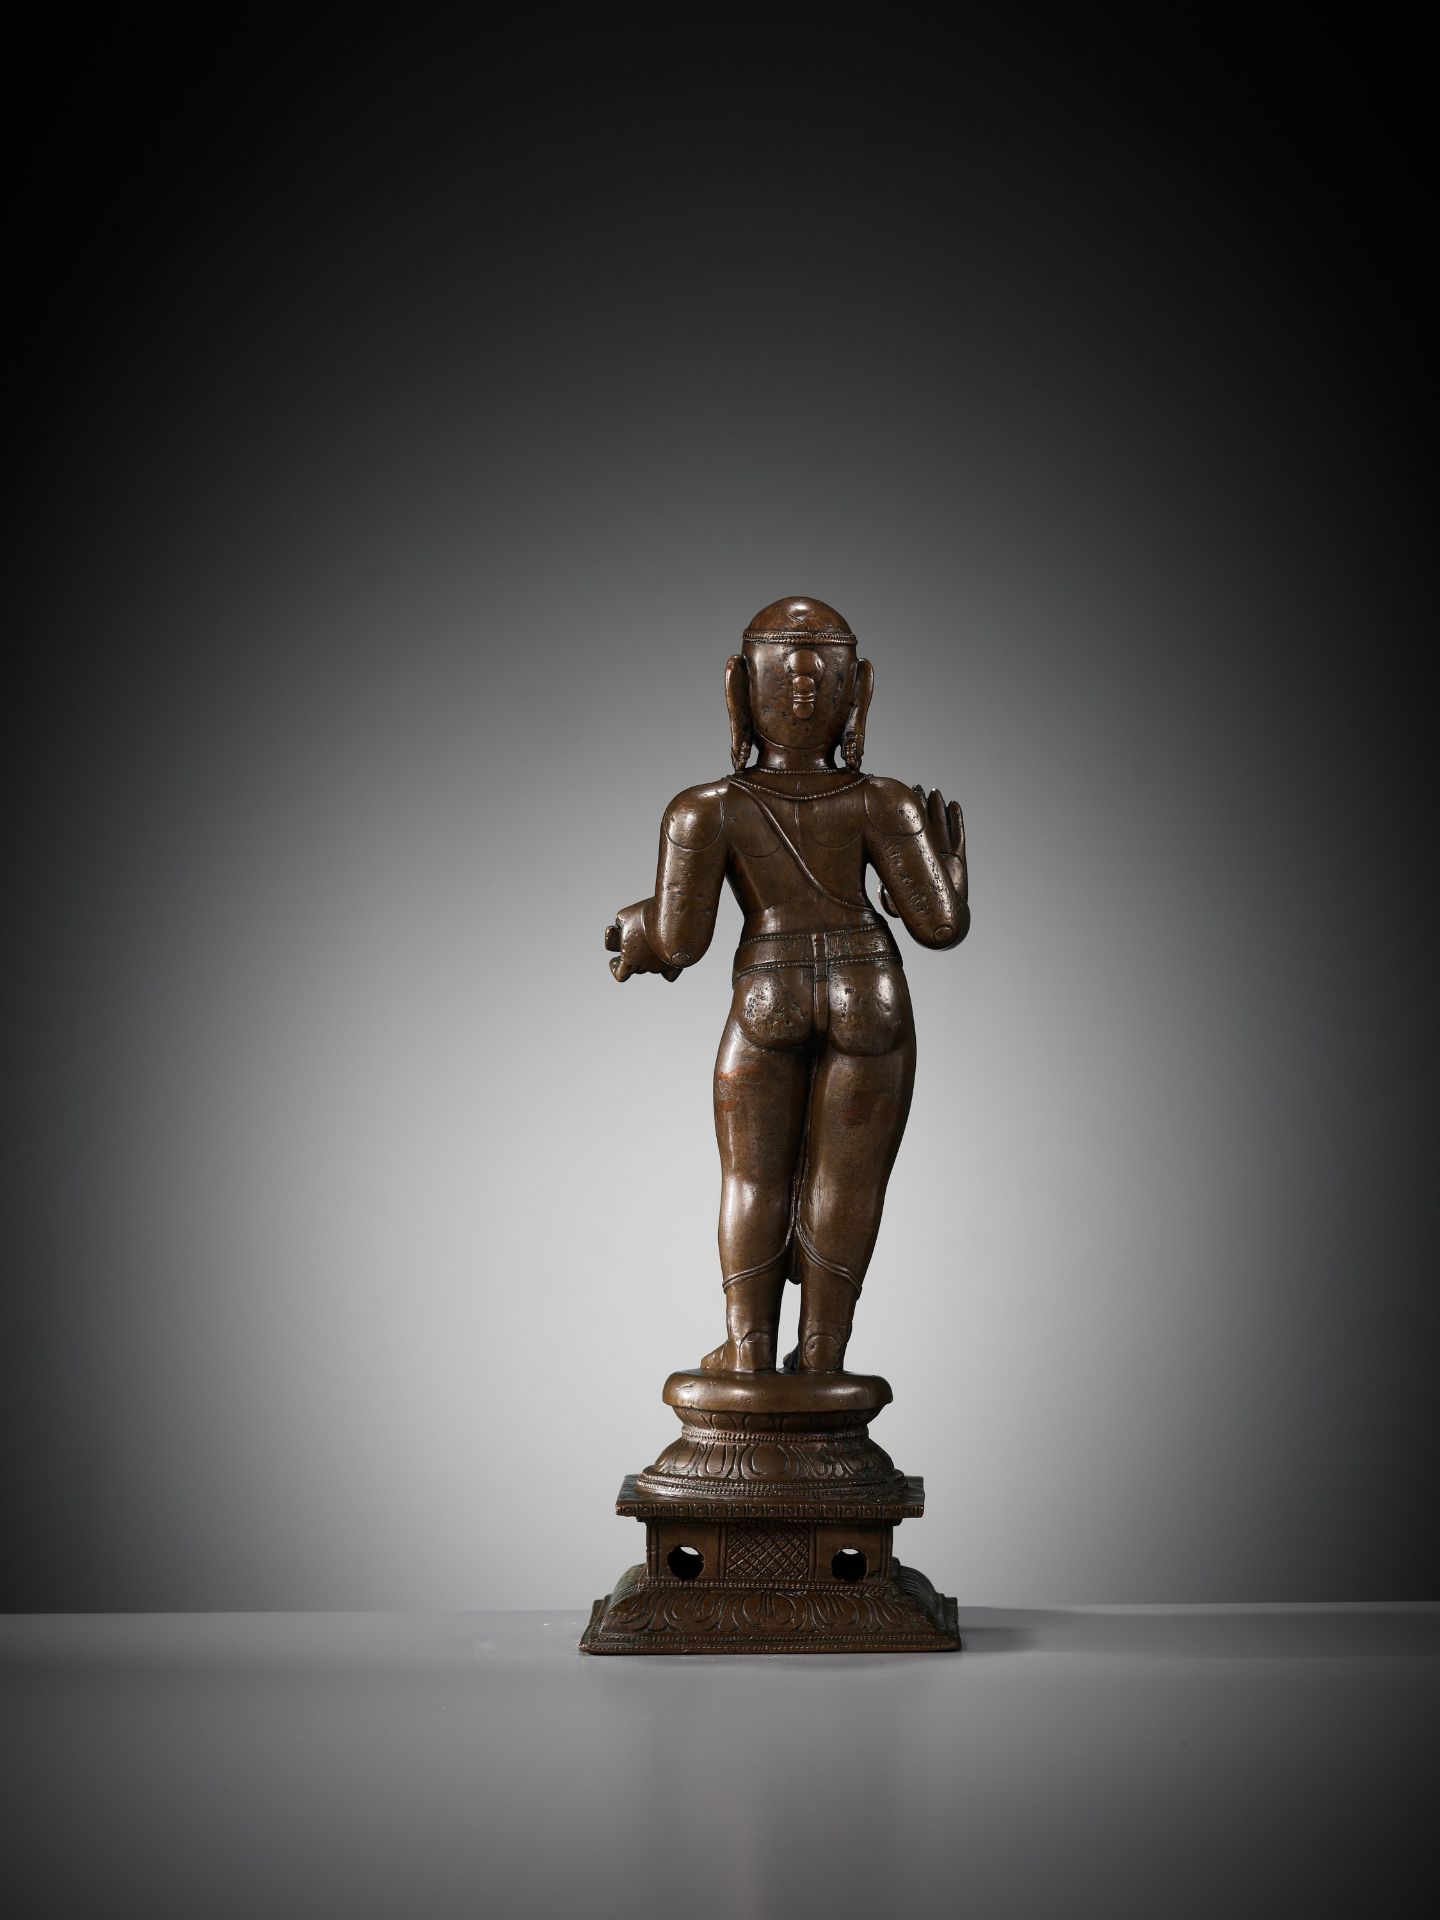 A LARGE COPPER ALLOY FIGURE OF MANIKKAVACAKAR, TAMIL NADU, 14TH-15TH CENTURY - Image 10 of 16